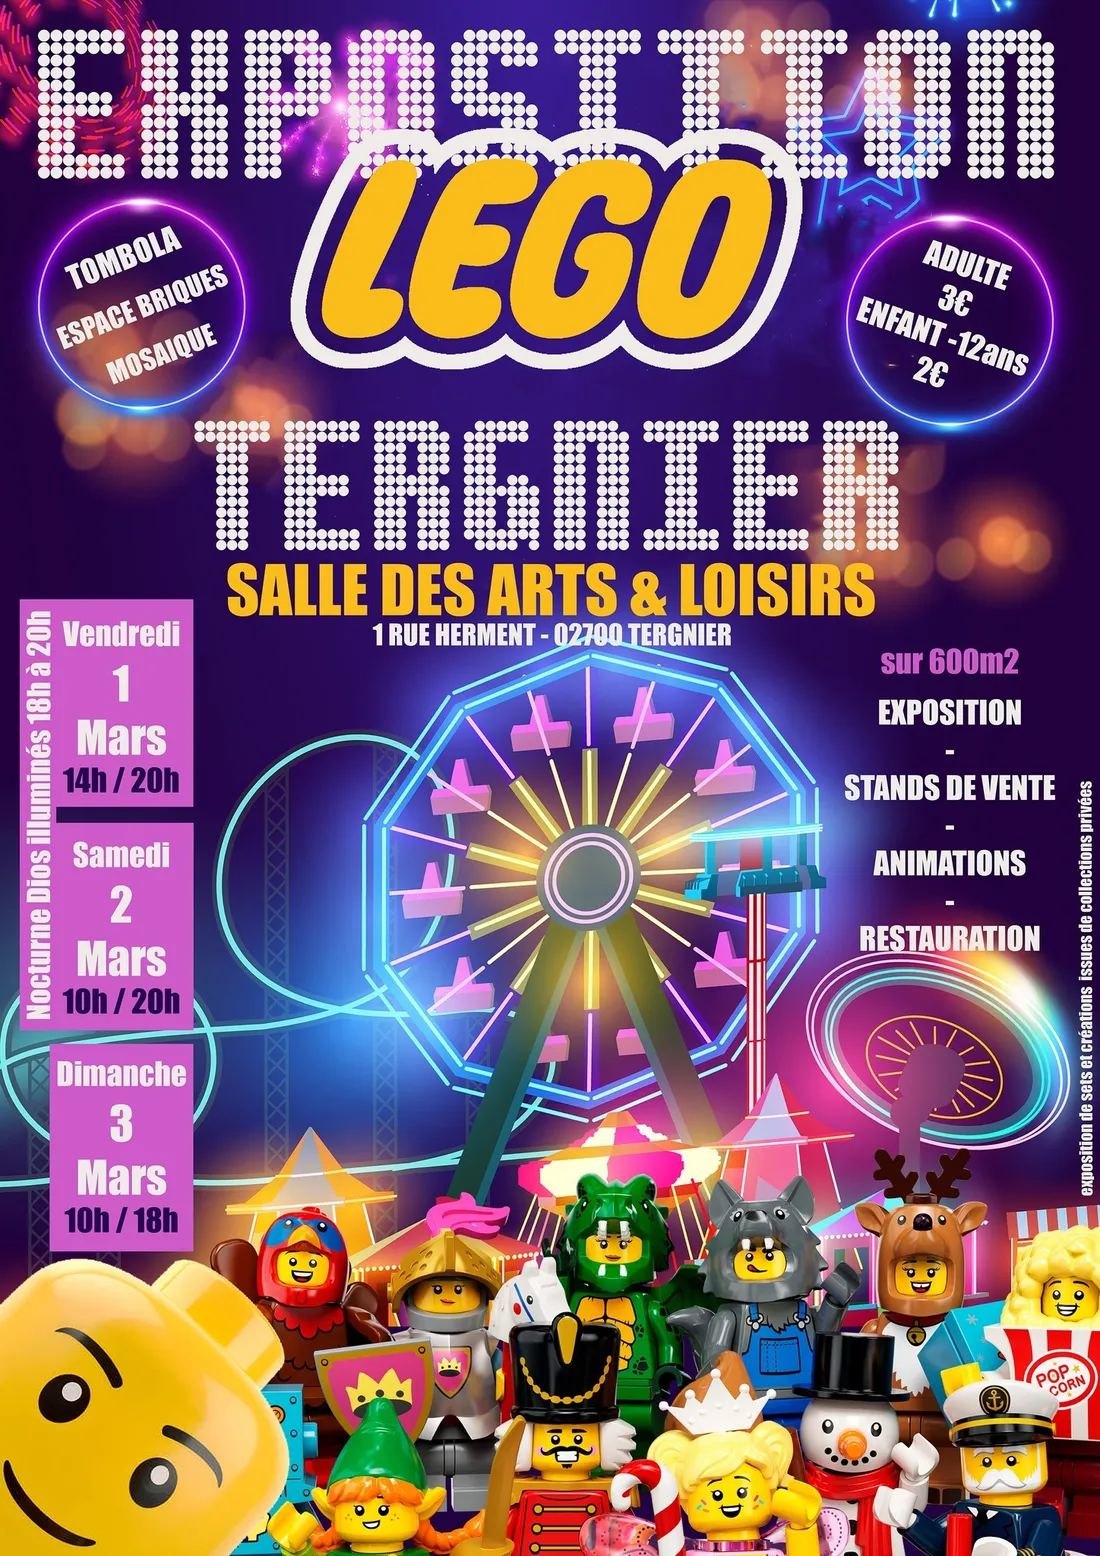 expo lego tergnier.jpg (1.84 MB)